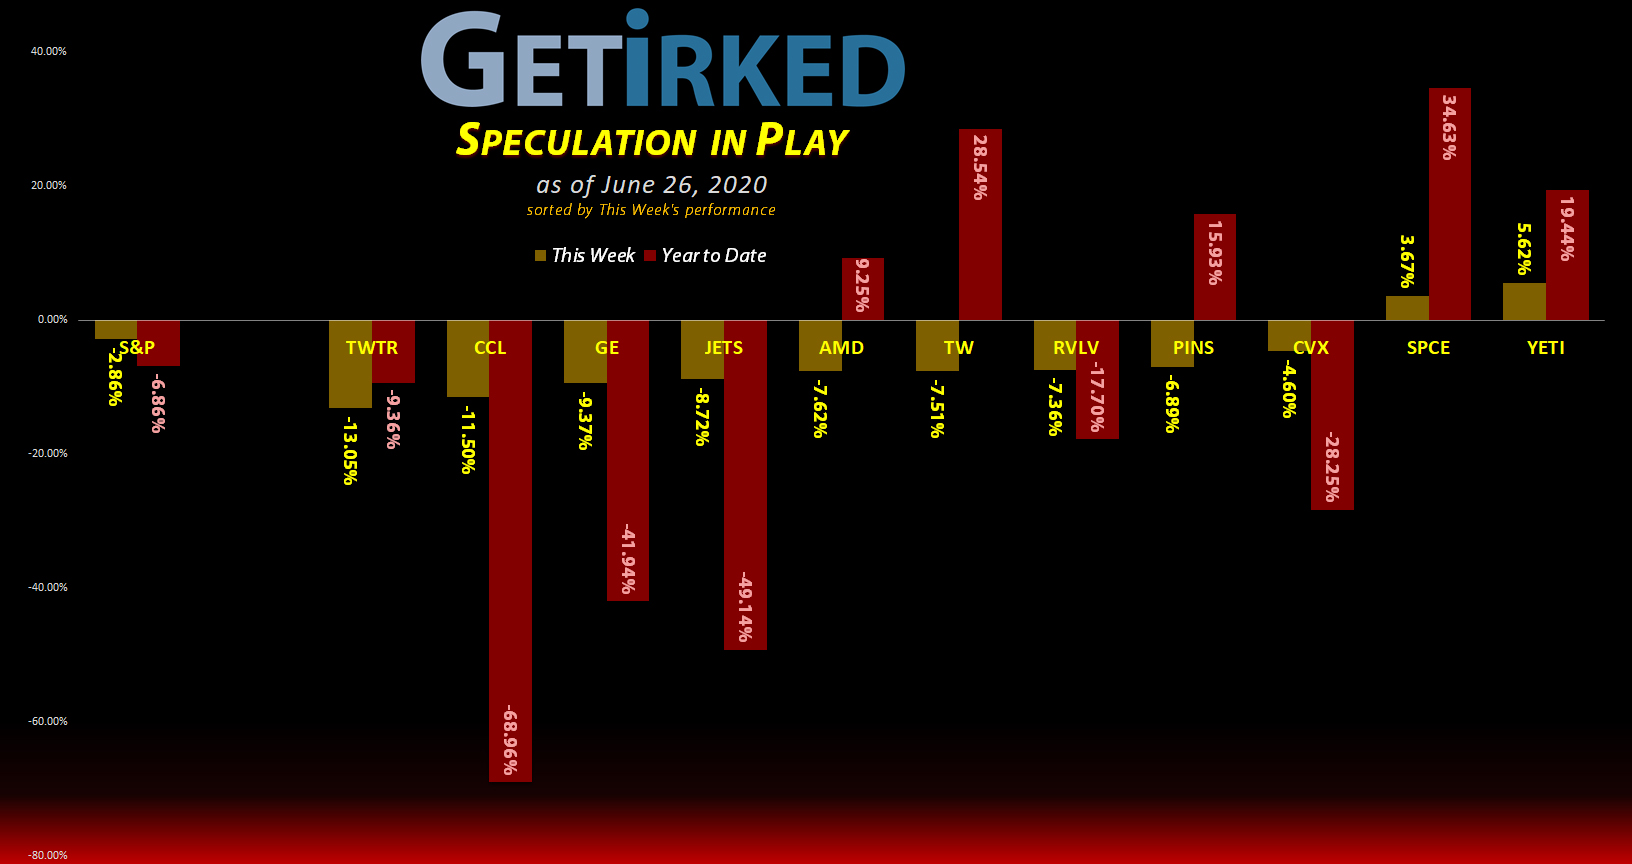 Get Irked's Speculation in Play - June 26, 2020